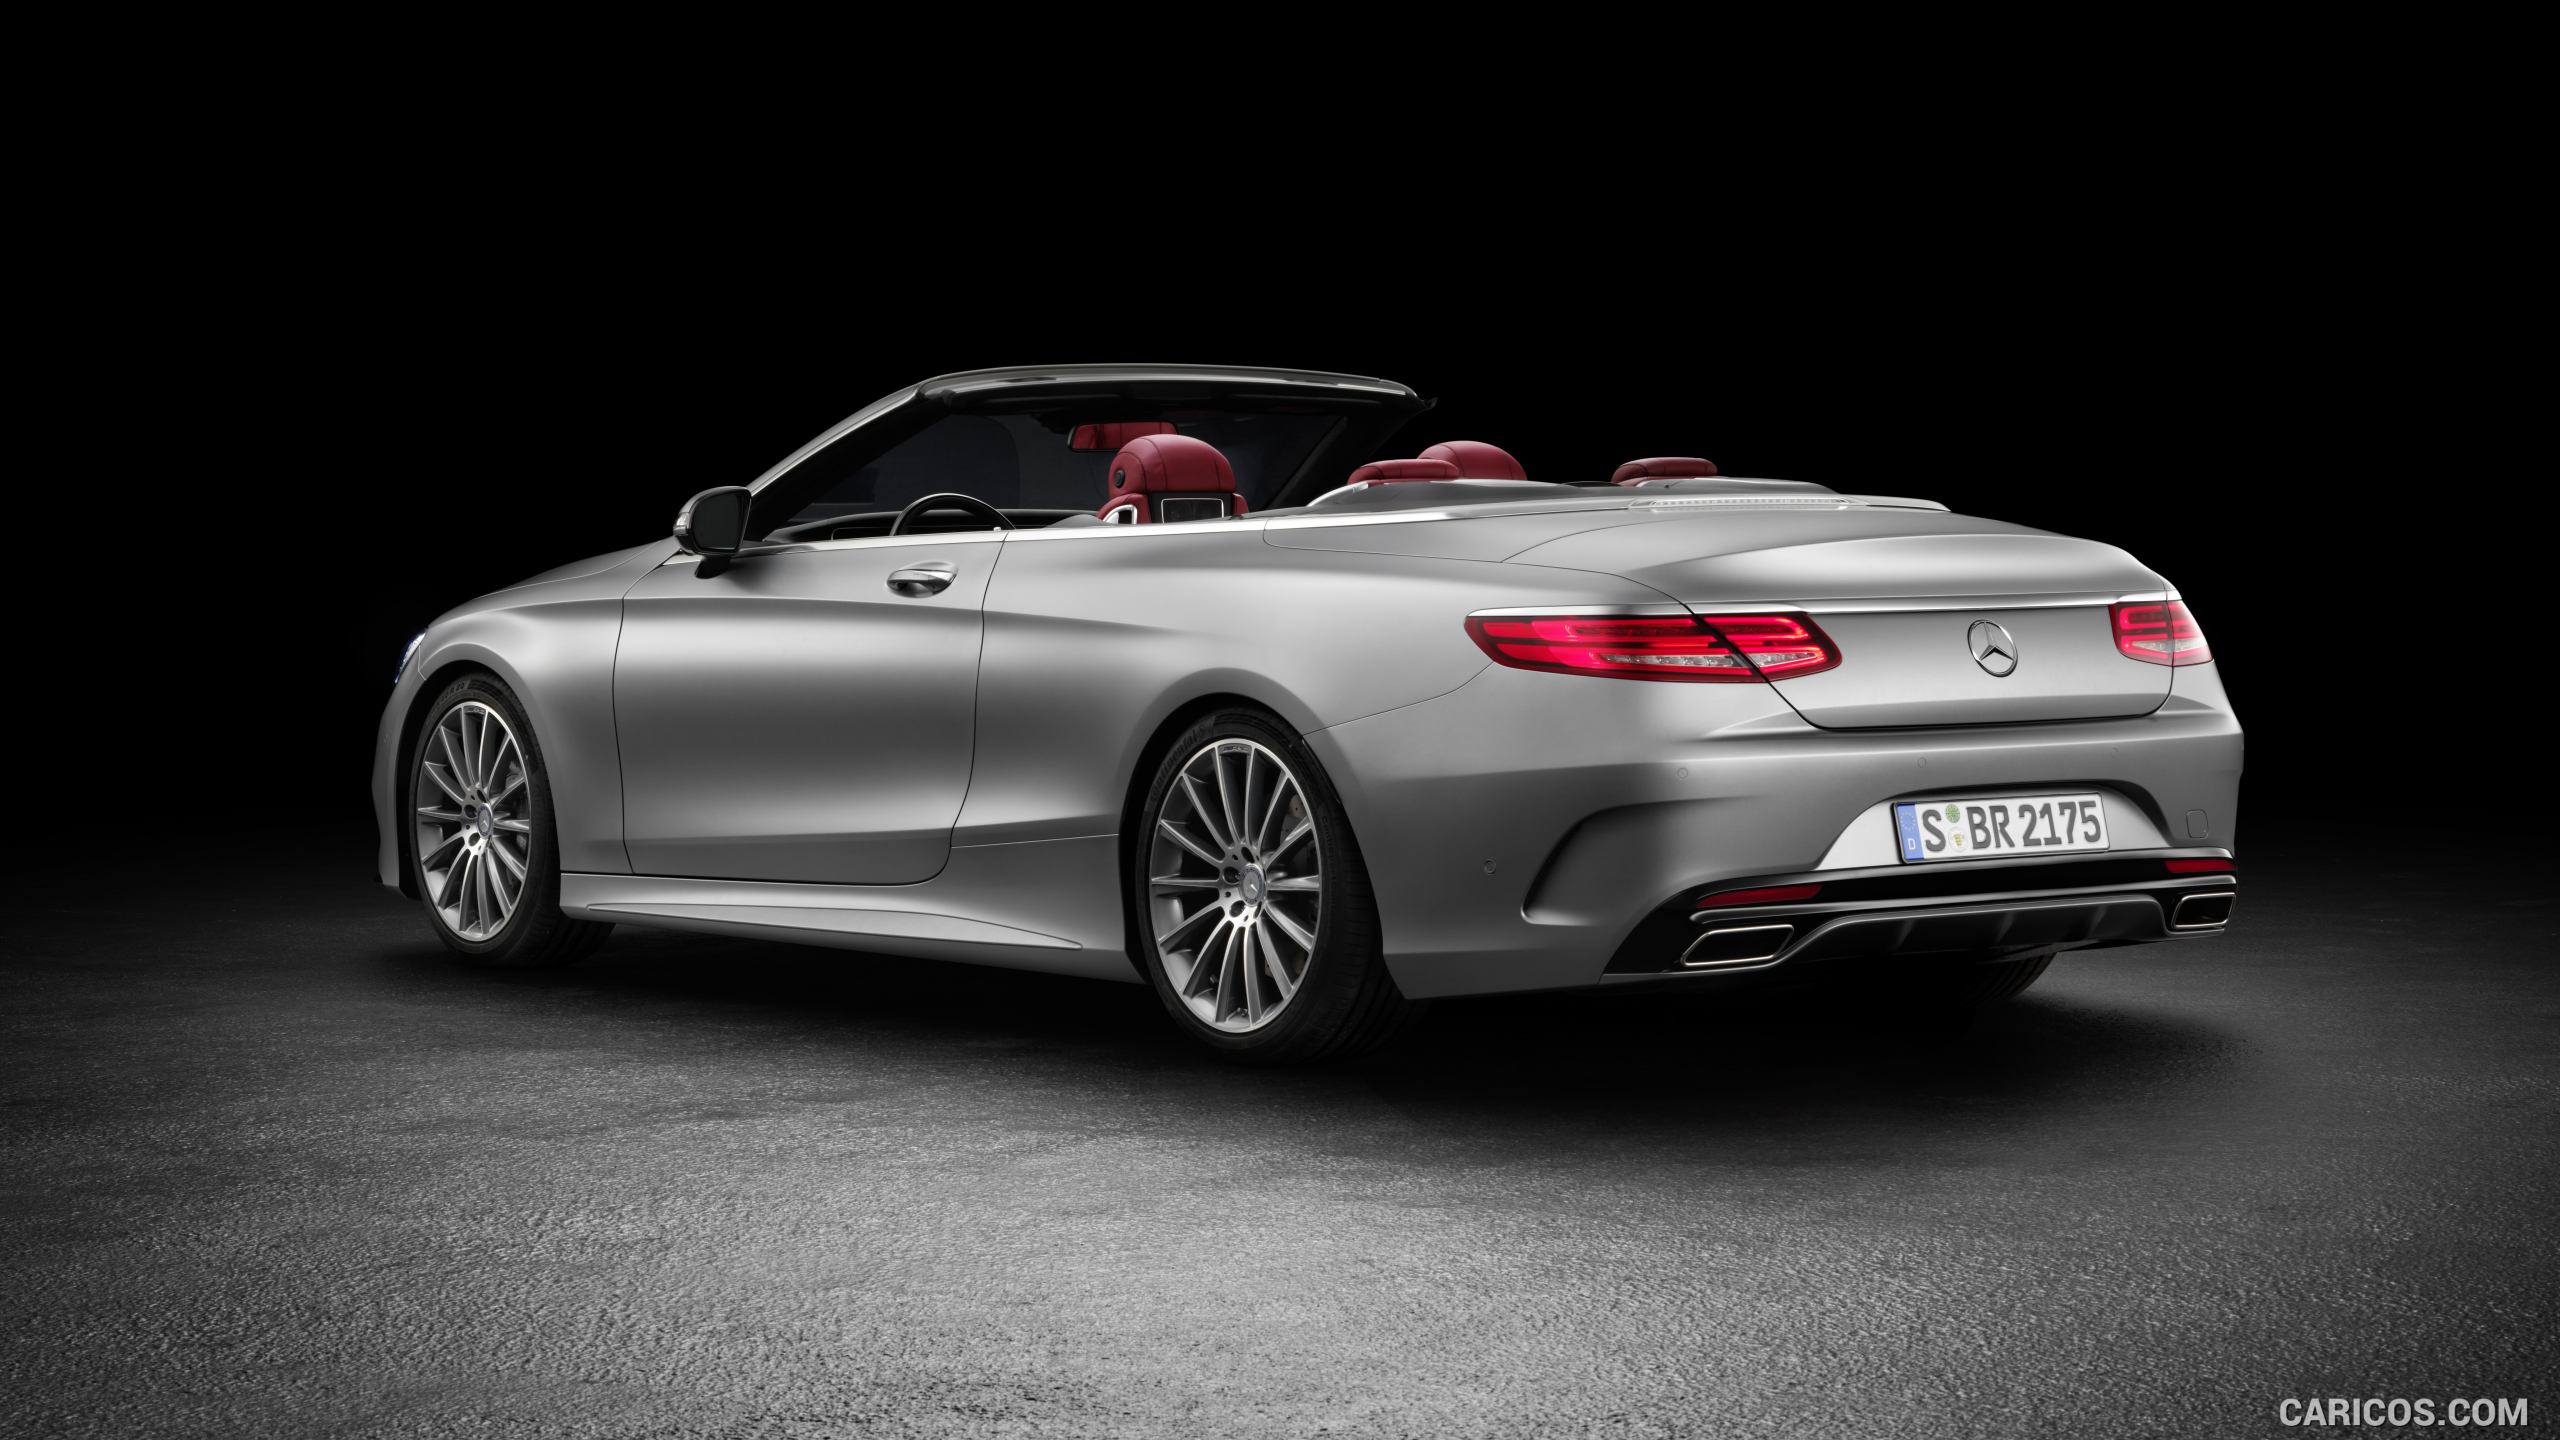 2017 Mercedes-Benz S-Class S500 Cabriolet AMG-line (Alanit Grey Magno) - Rear, #24 of 56